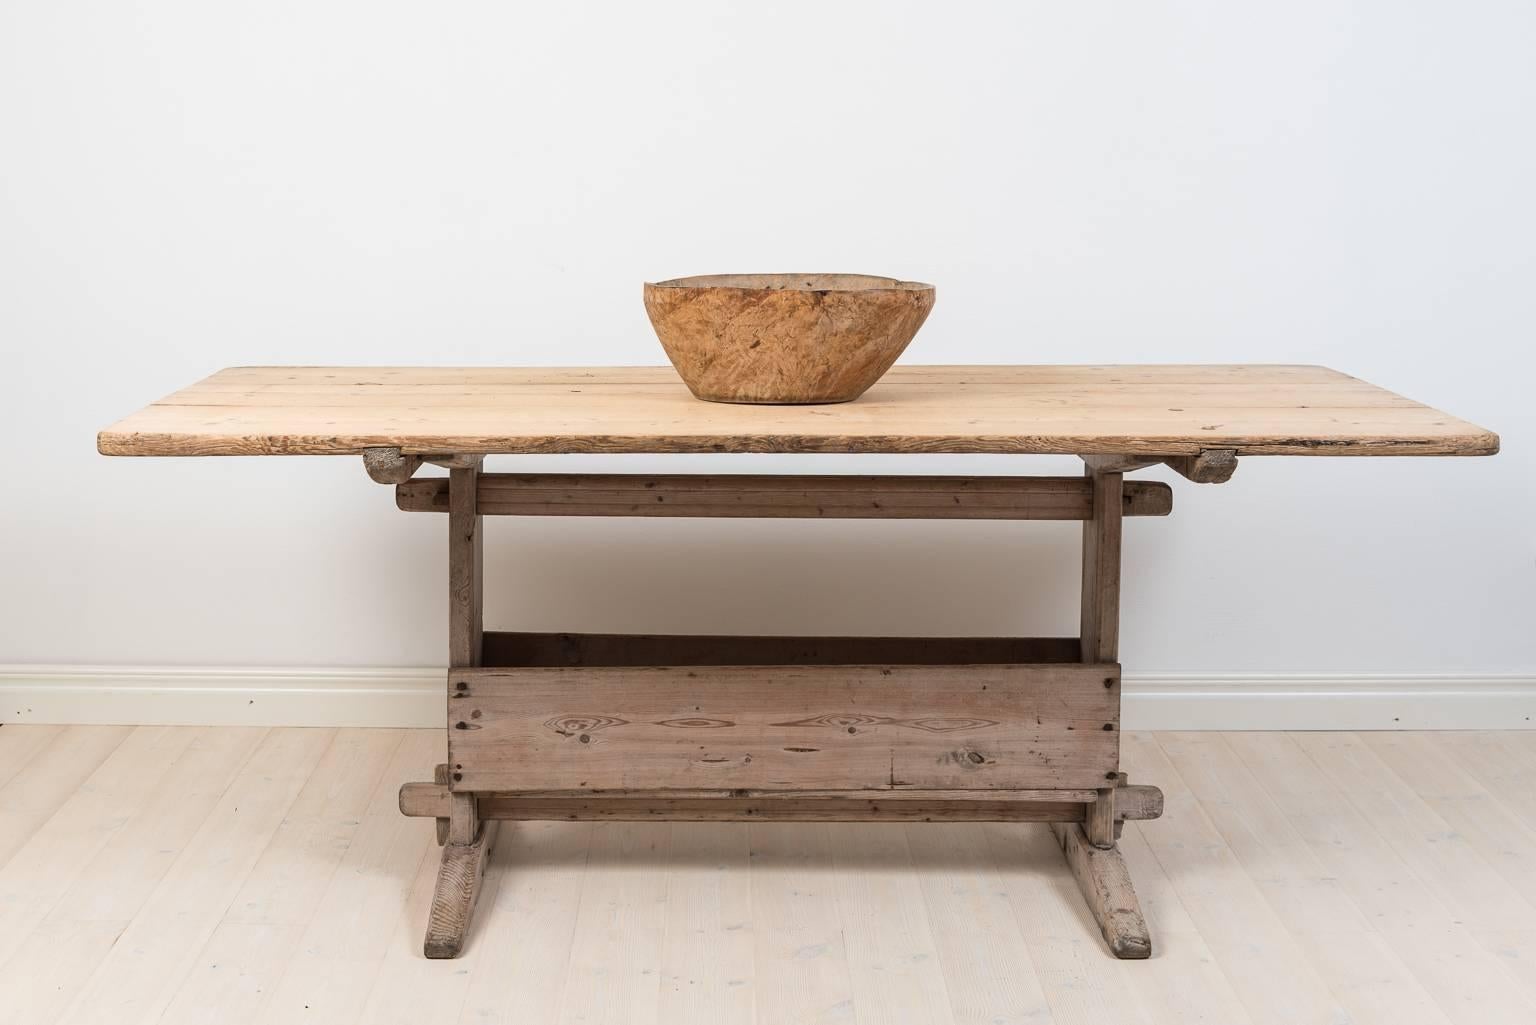 18th century Swedish  folk art table with rectangular removable table top on a leg frame of trestles. The table has never been painted and has a natural worn surface due to 250 years of use. The table is from a small village just east of Sweden’s